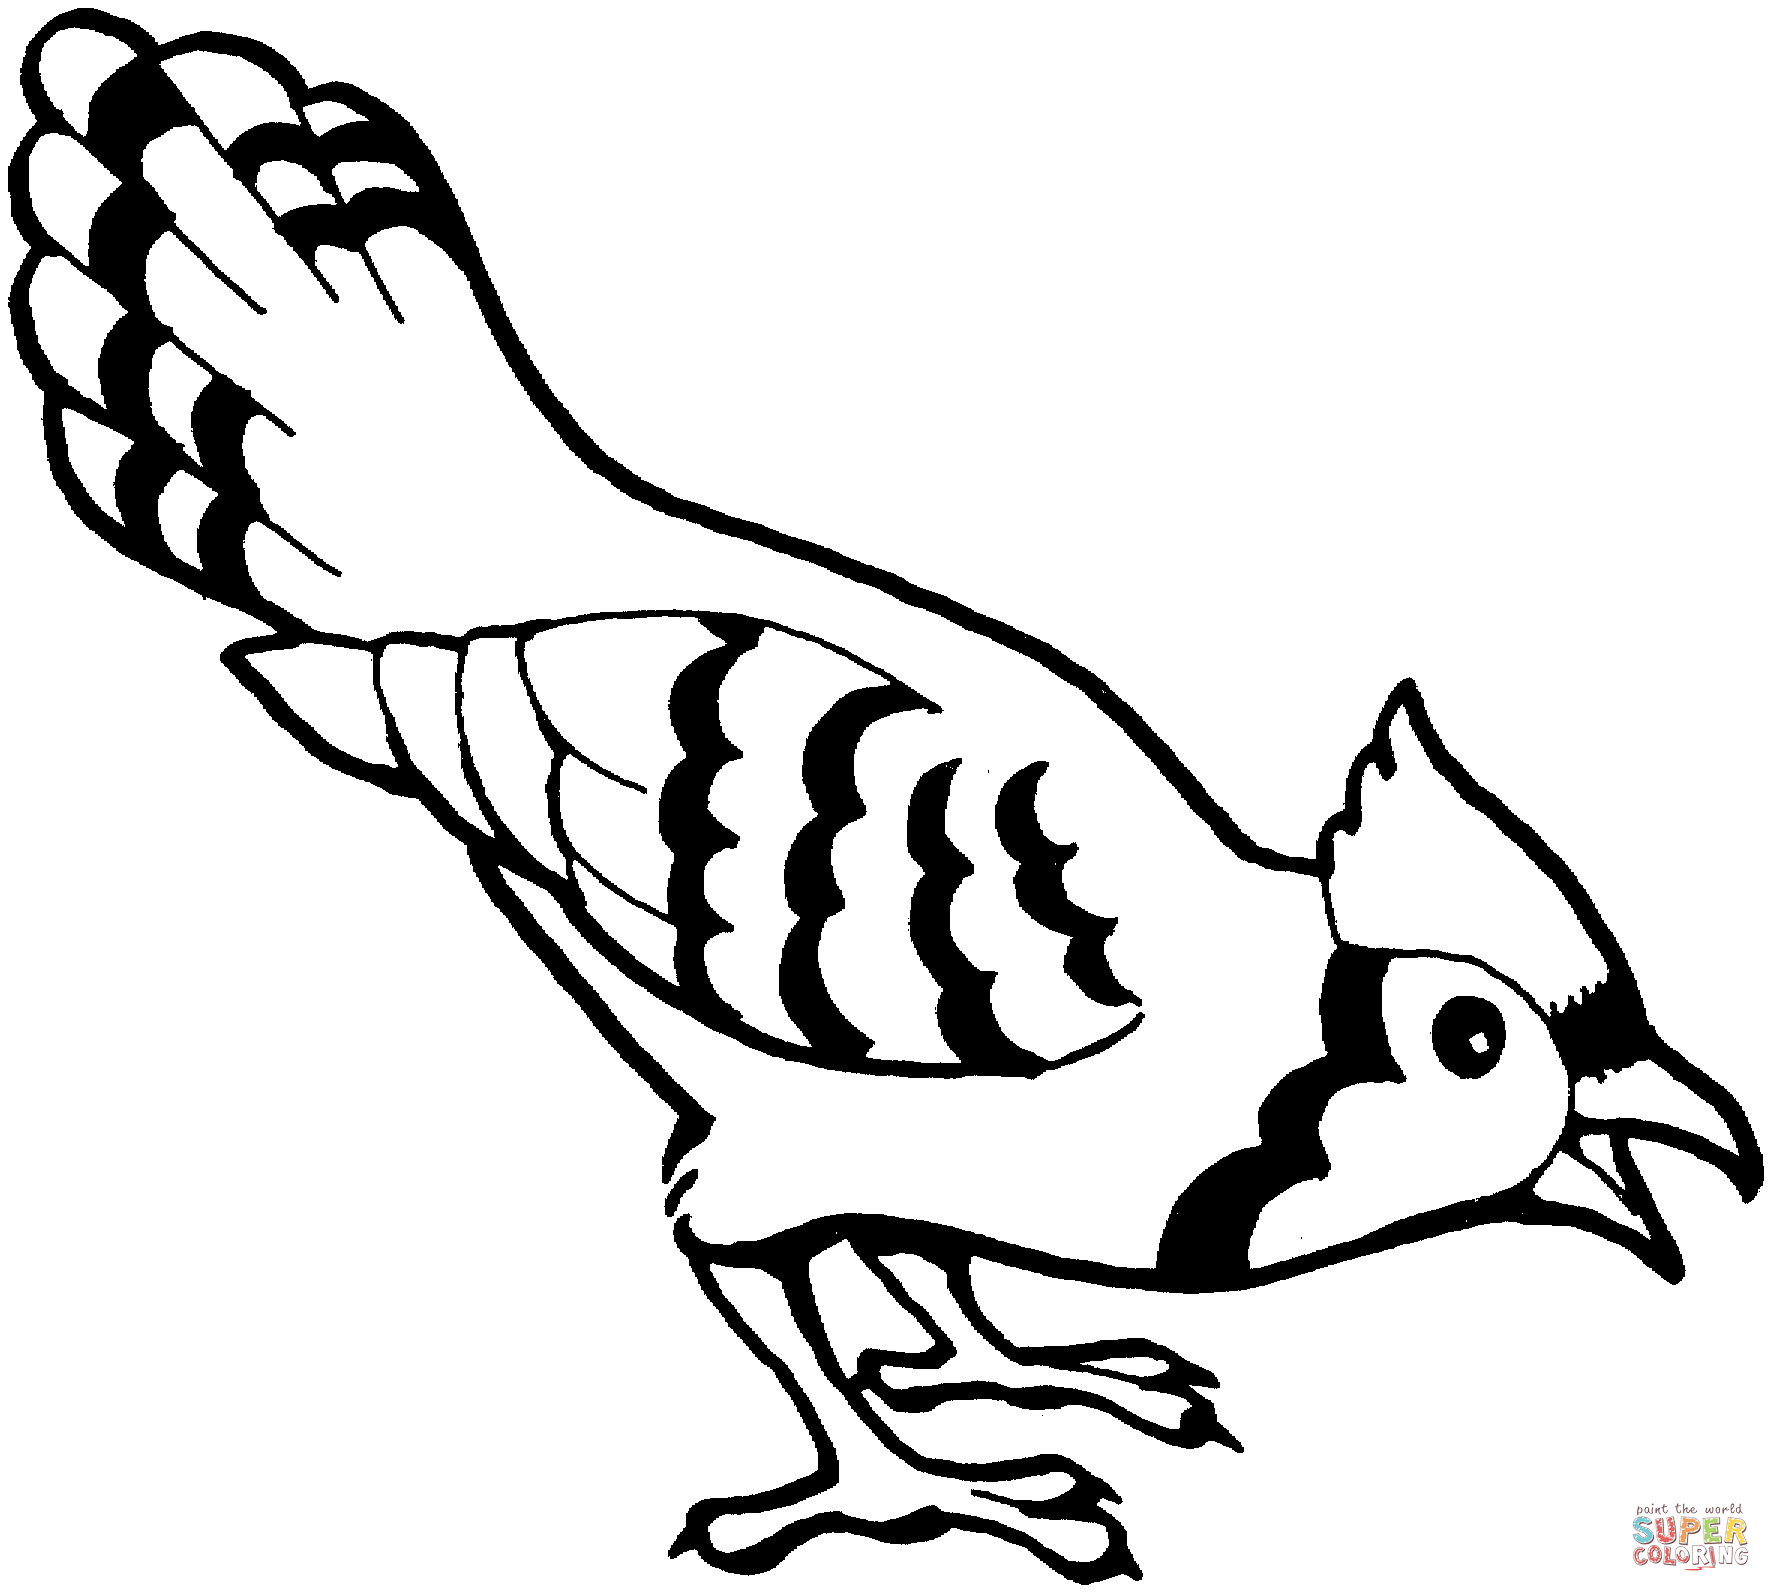 Blue Jay coloring #19, Download drawings